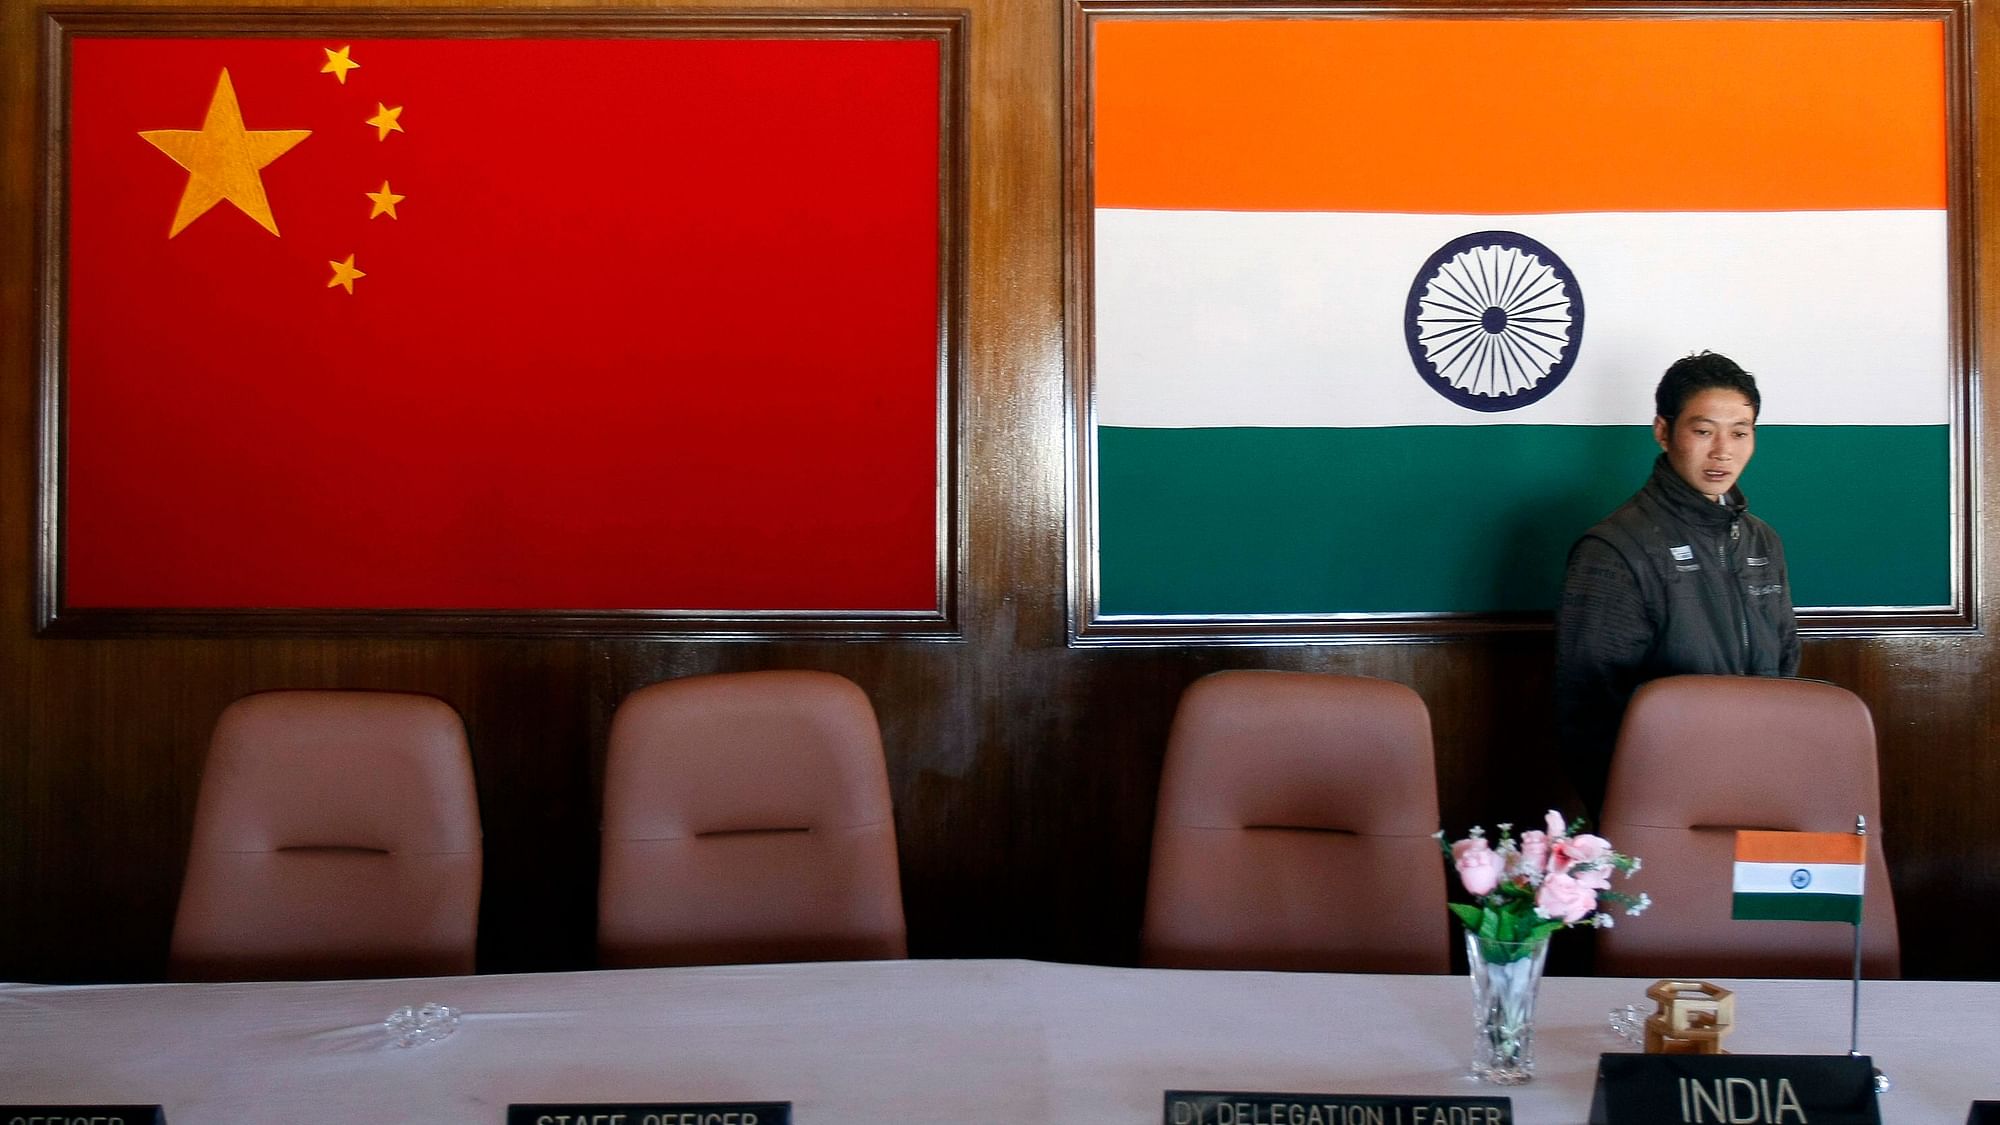 “This was not the first time that China has sought to raise a subject that is solely an internal matter of India,” India’s Ministry of External Affairs (MEA) said on Thursday, 6 August, after China raised the Kashmir issue for deliberations in the 15-nation UN Security Council.